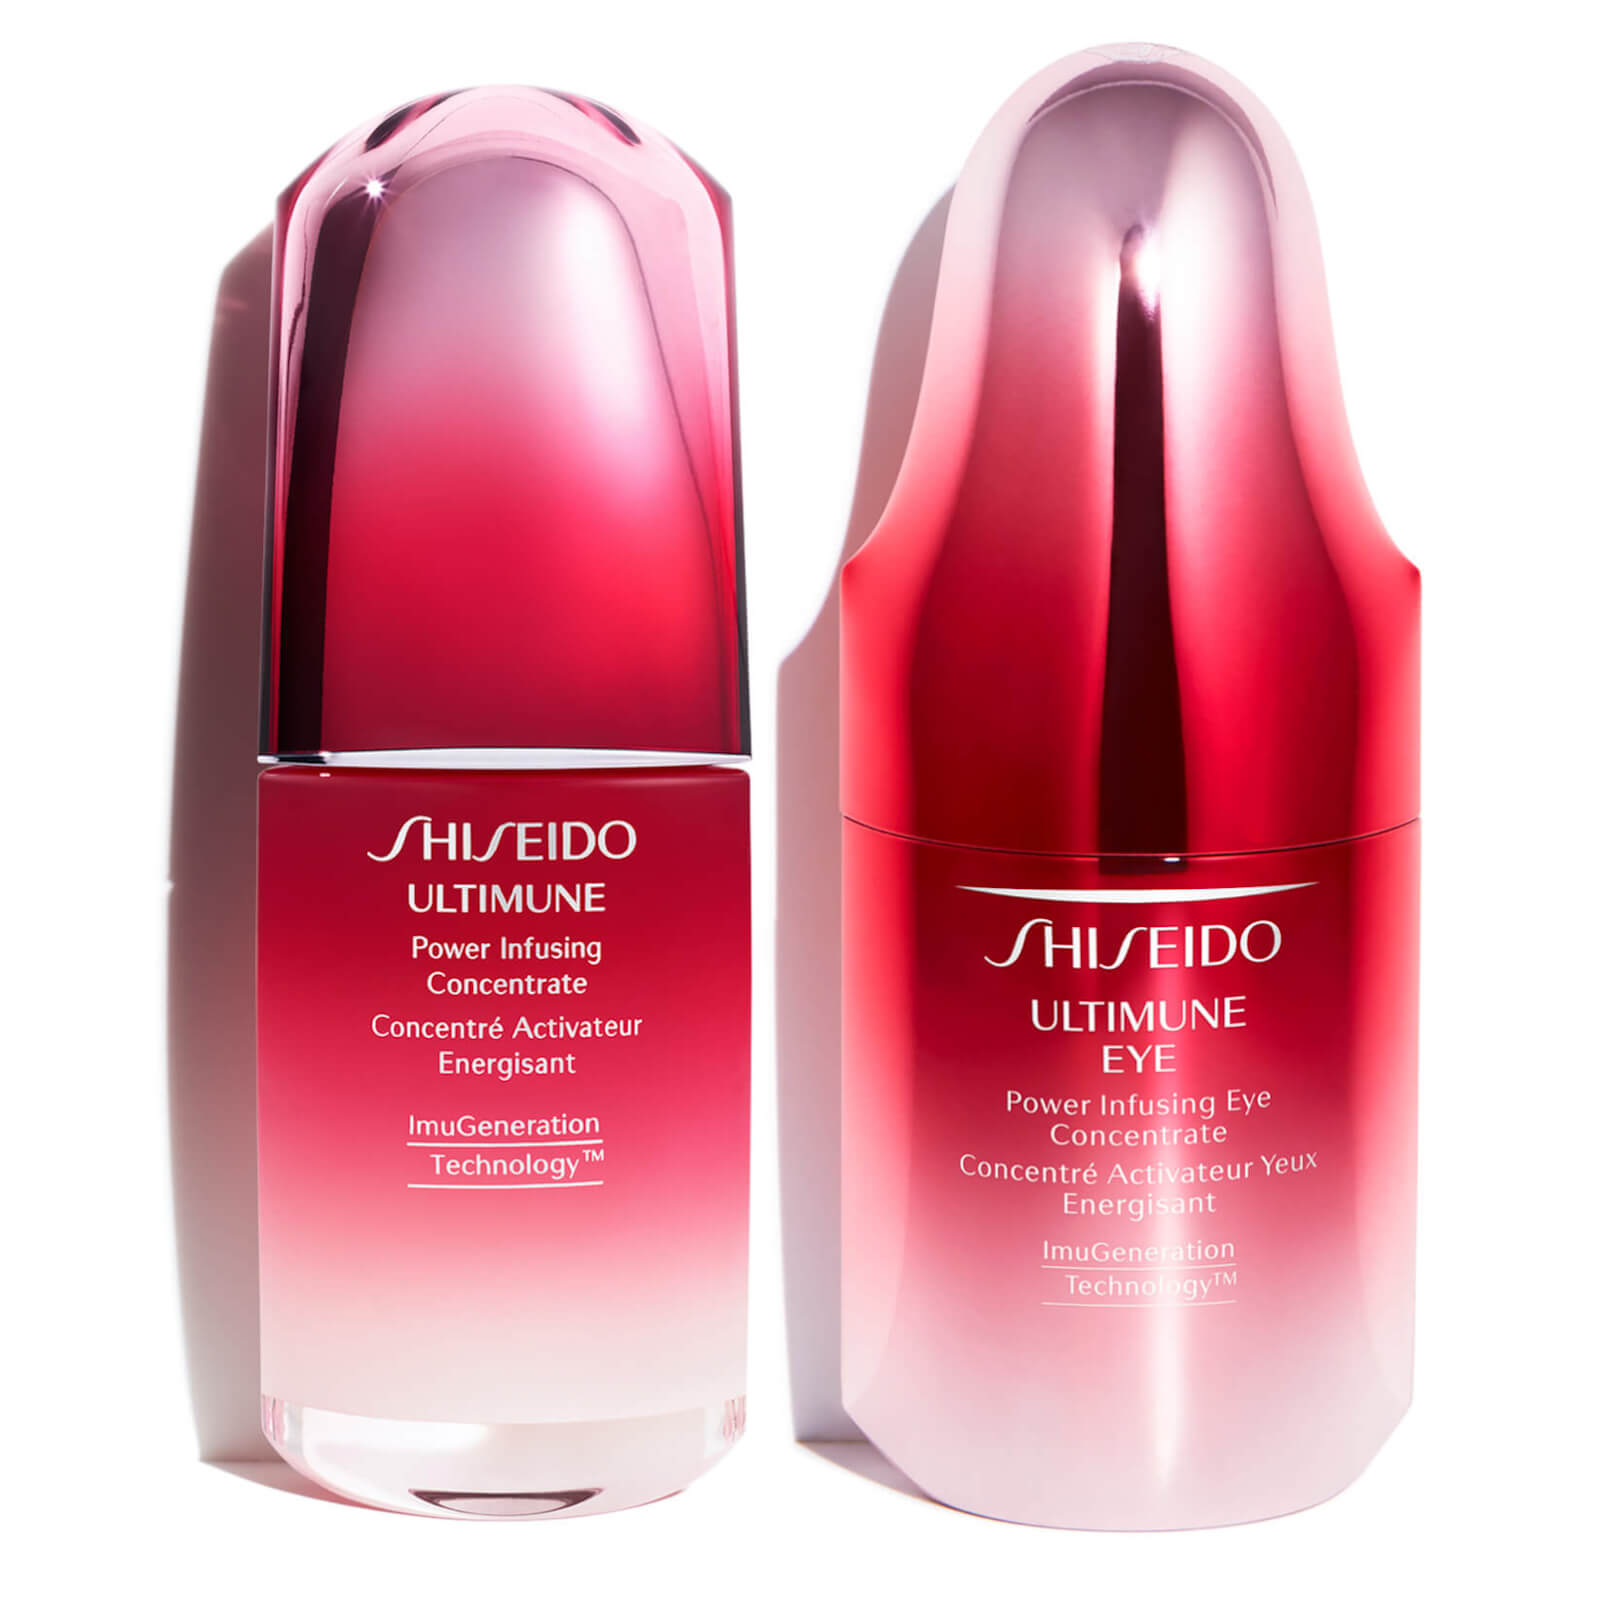 Shiseido power infusing concentrate. Ultimune концентрат шисейдо. Ultimune концентрат шисейдо Power infusing. Shiseido Ultimune Eye Power infusing Eye Concentrate. Shiseido Ultimate Power infusing.